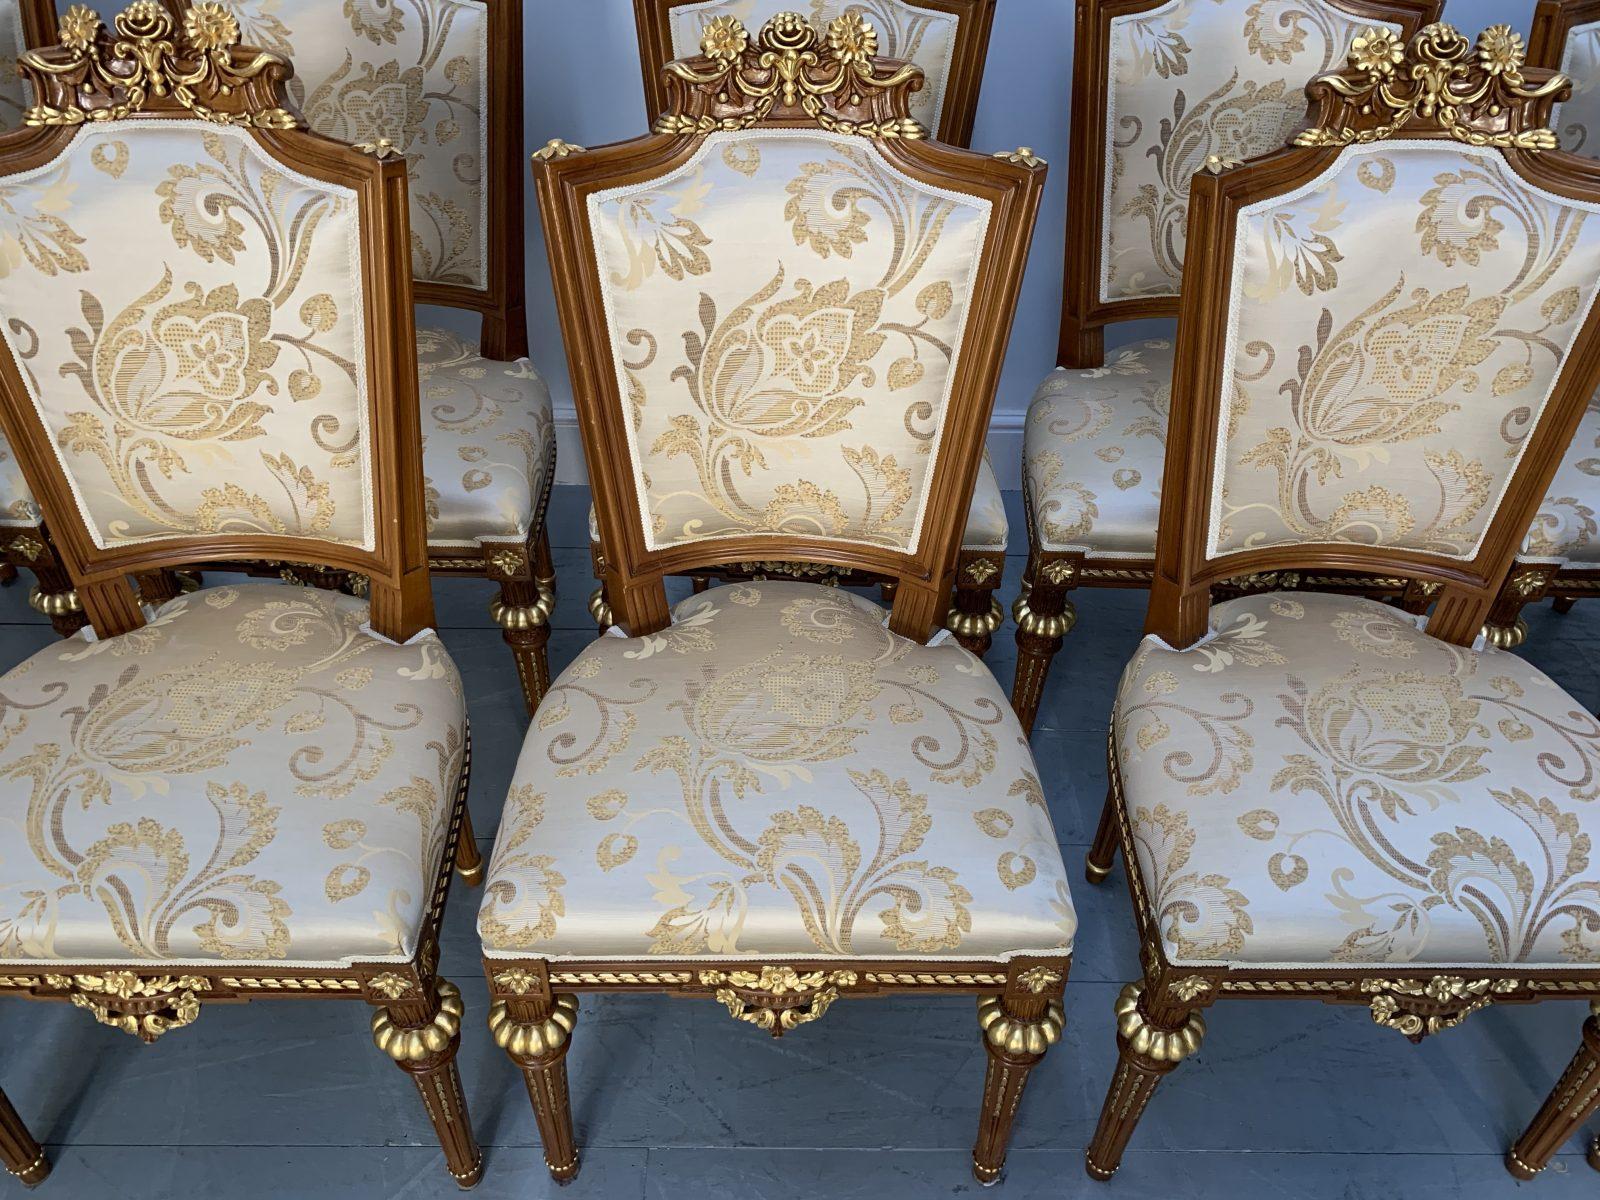 Wood Asnaghi “Eubea” Dining Table and 12 Chair Suite in Harwood, Gilt and Silk For Sale